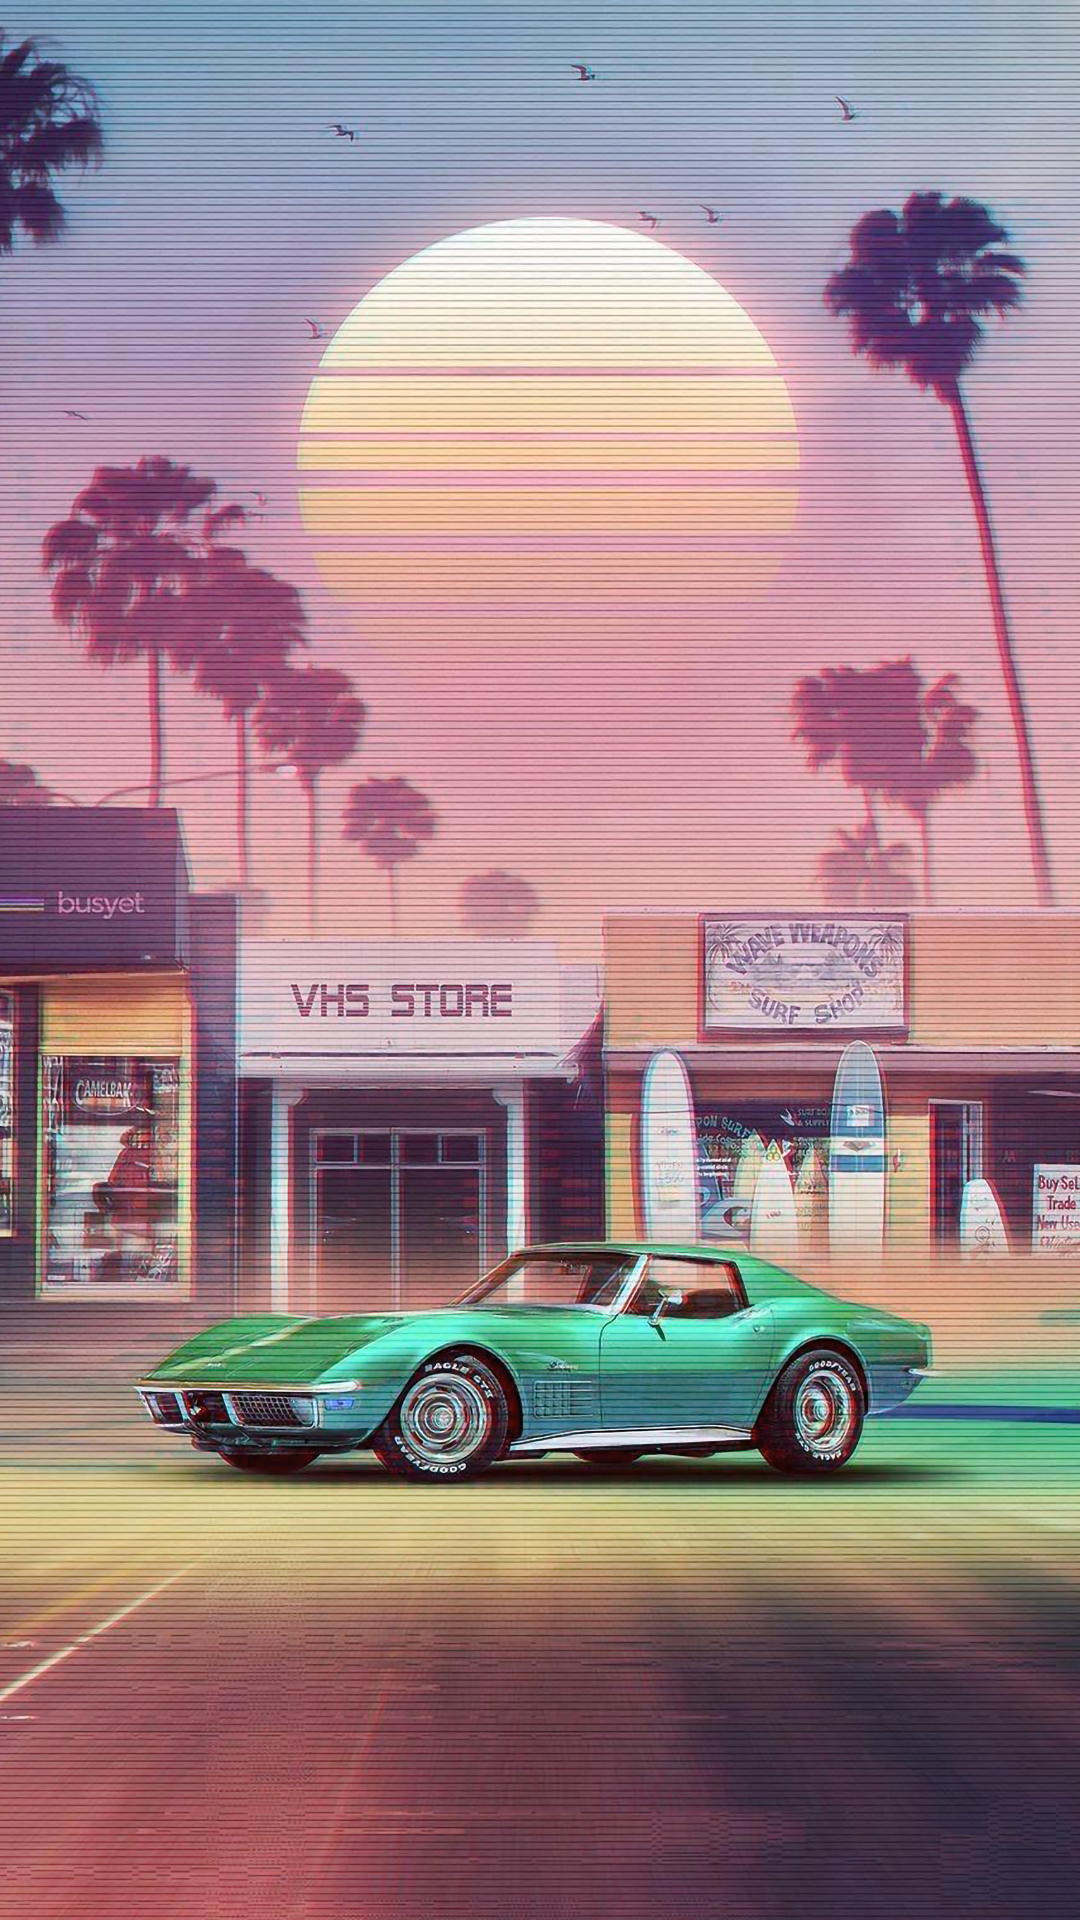 Wallpaper Vaporwave, 80s Aesthetic Retro, 1980s, 1990s, Synthwave,  Background - Download Free Image